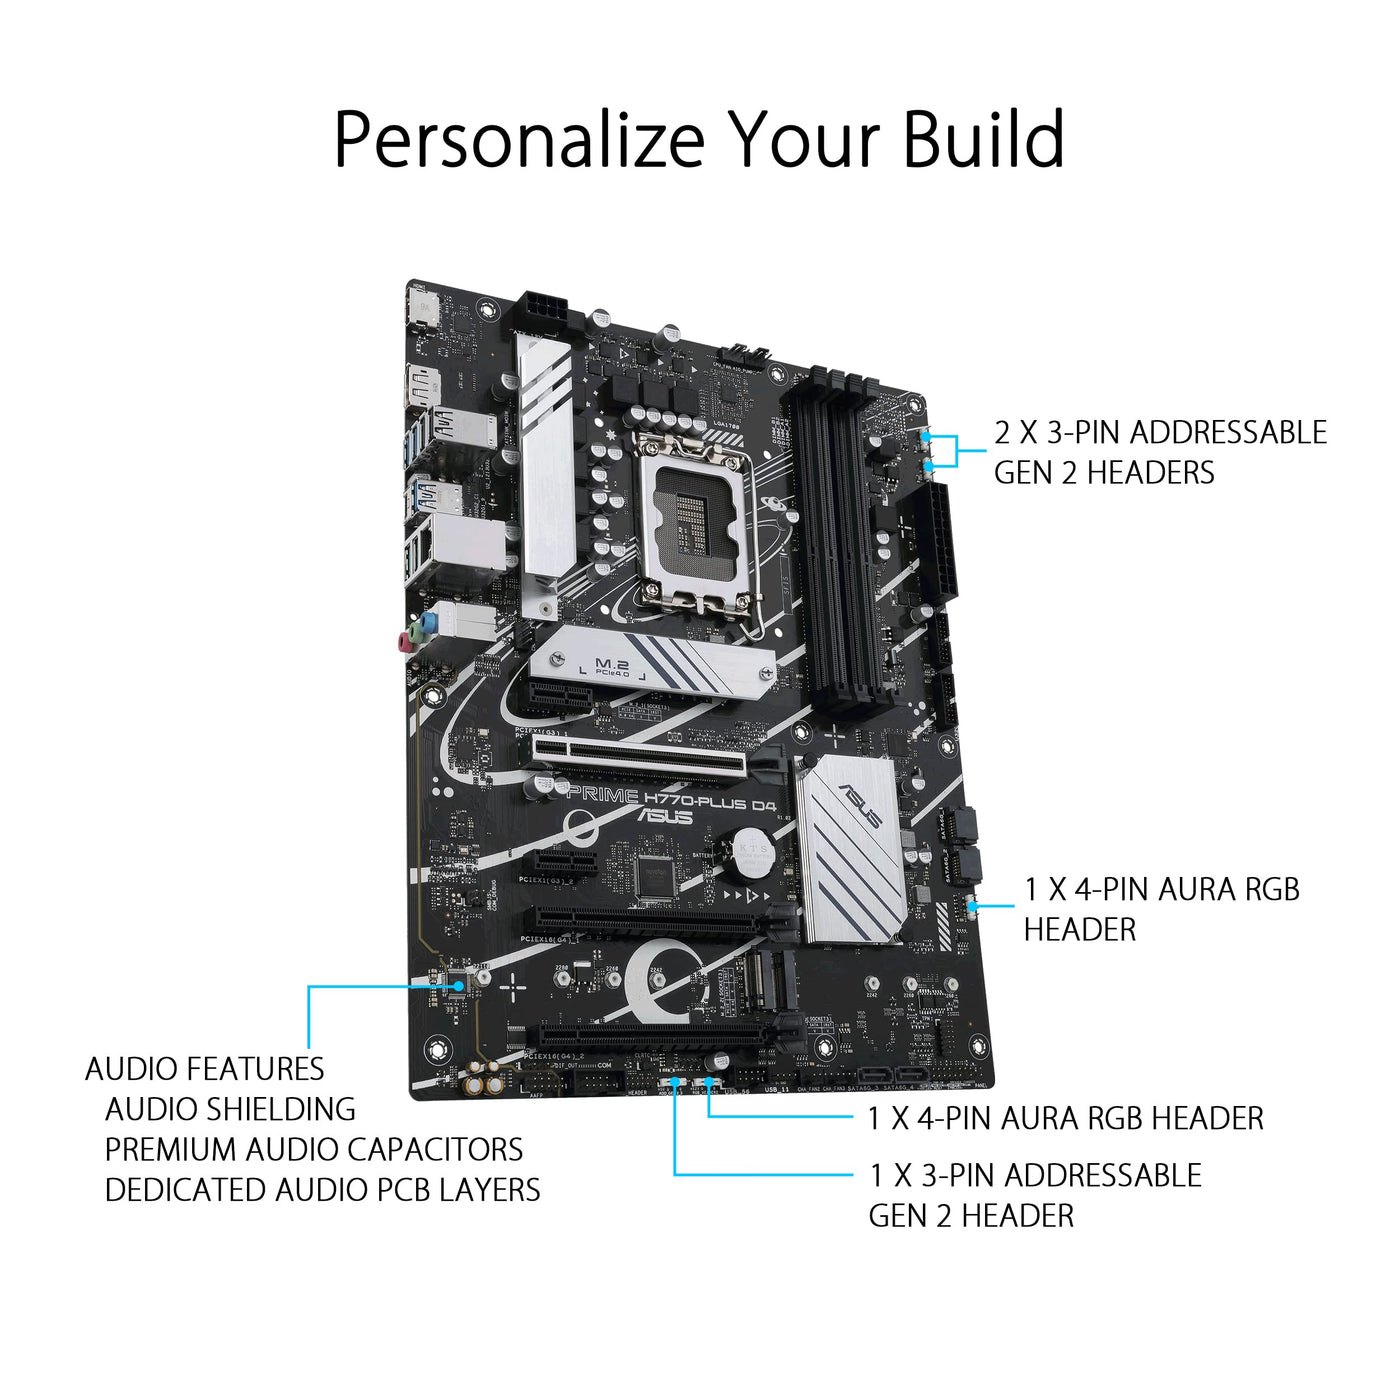 ASUS H770 ATX Motherboard with PCIe 5.0, ThunderboltTM Support